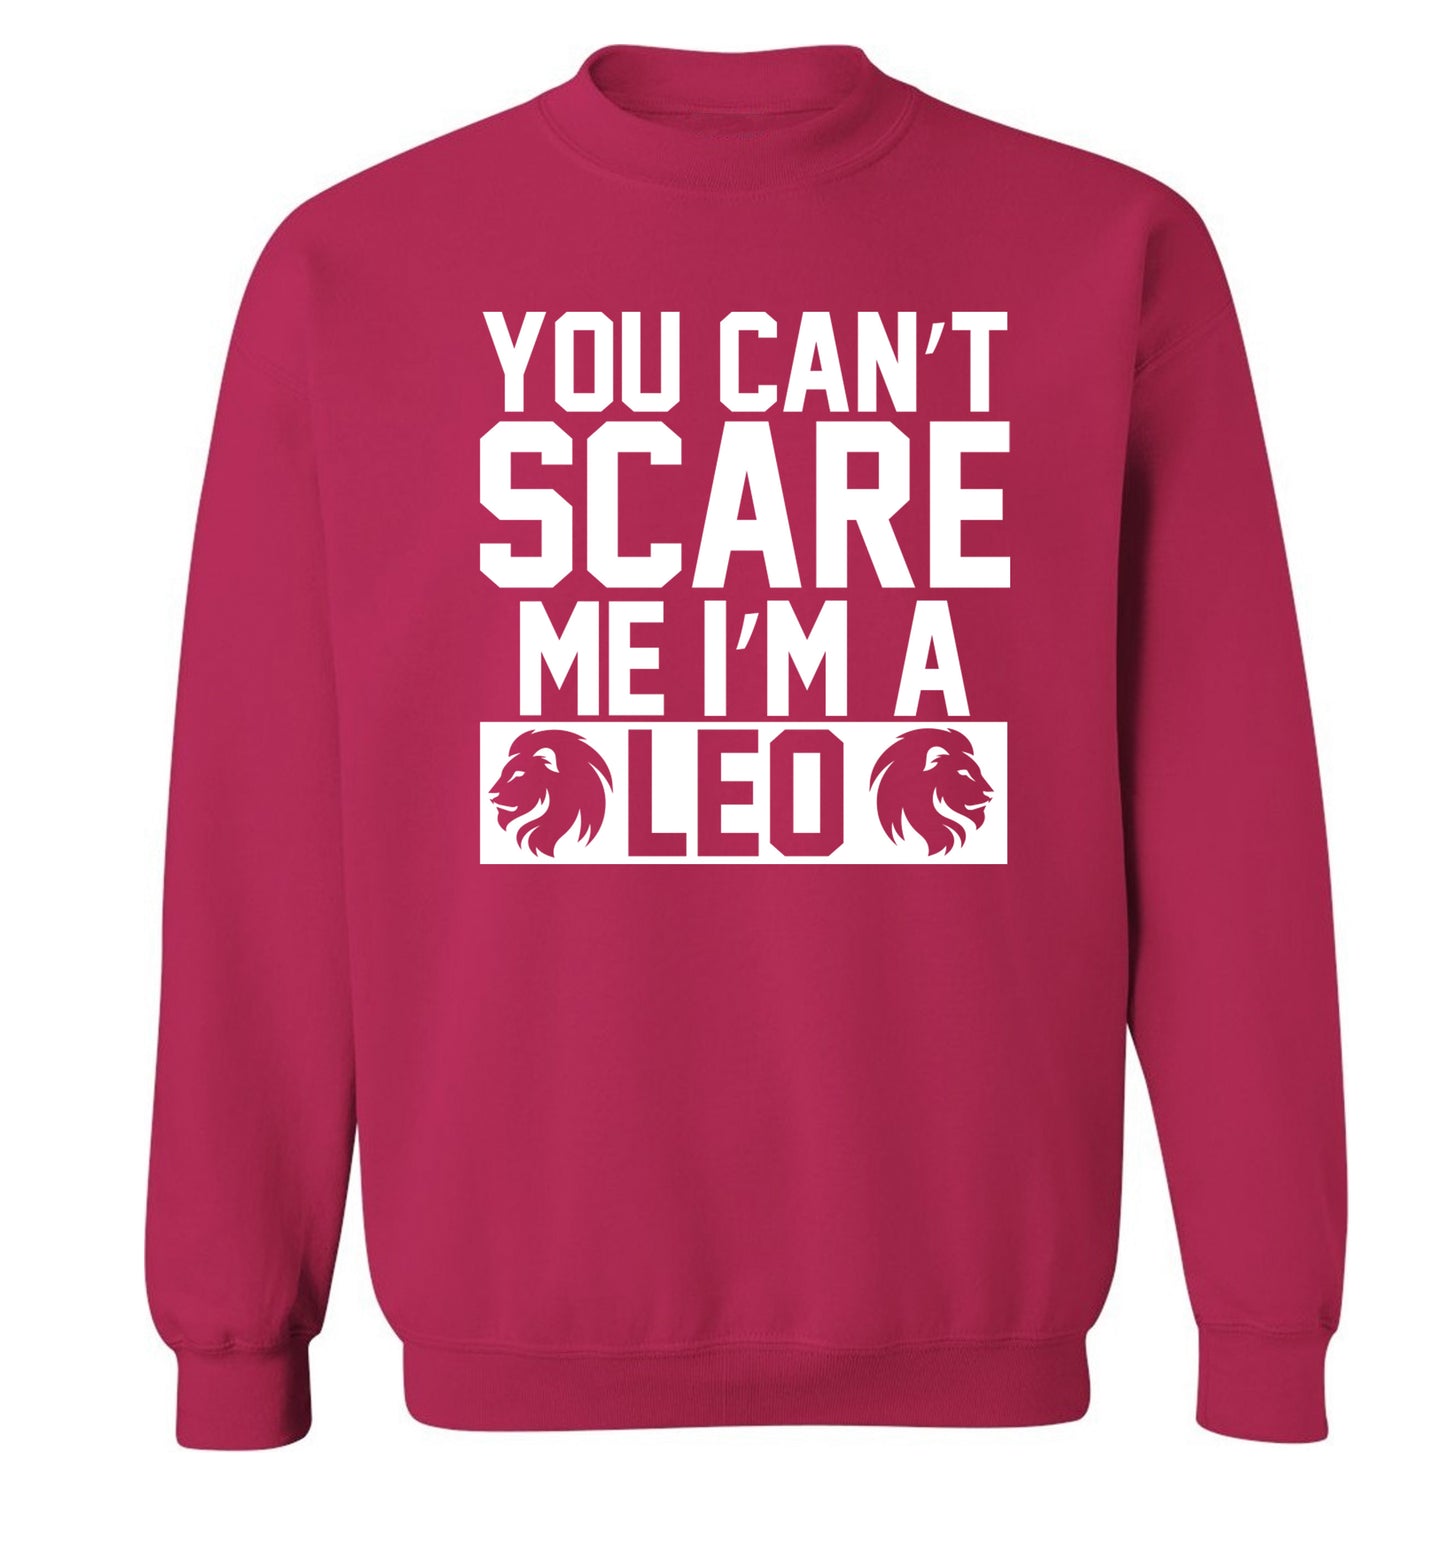 You can't scare me I'm a leo Adult's unisex pink Sweater 2XL